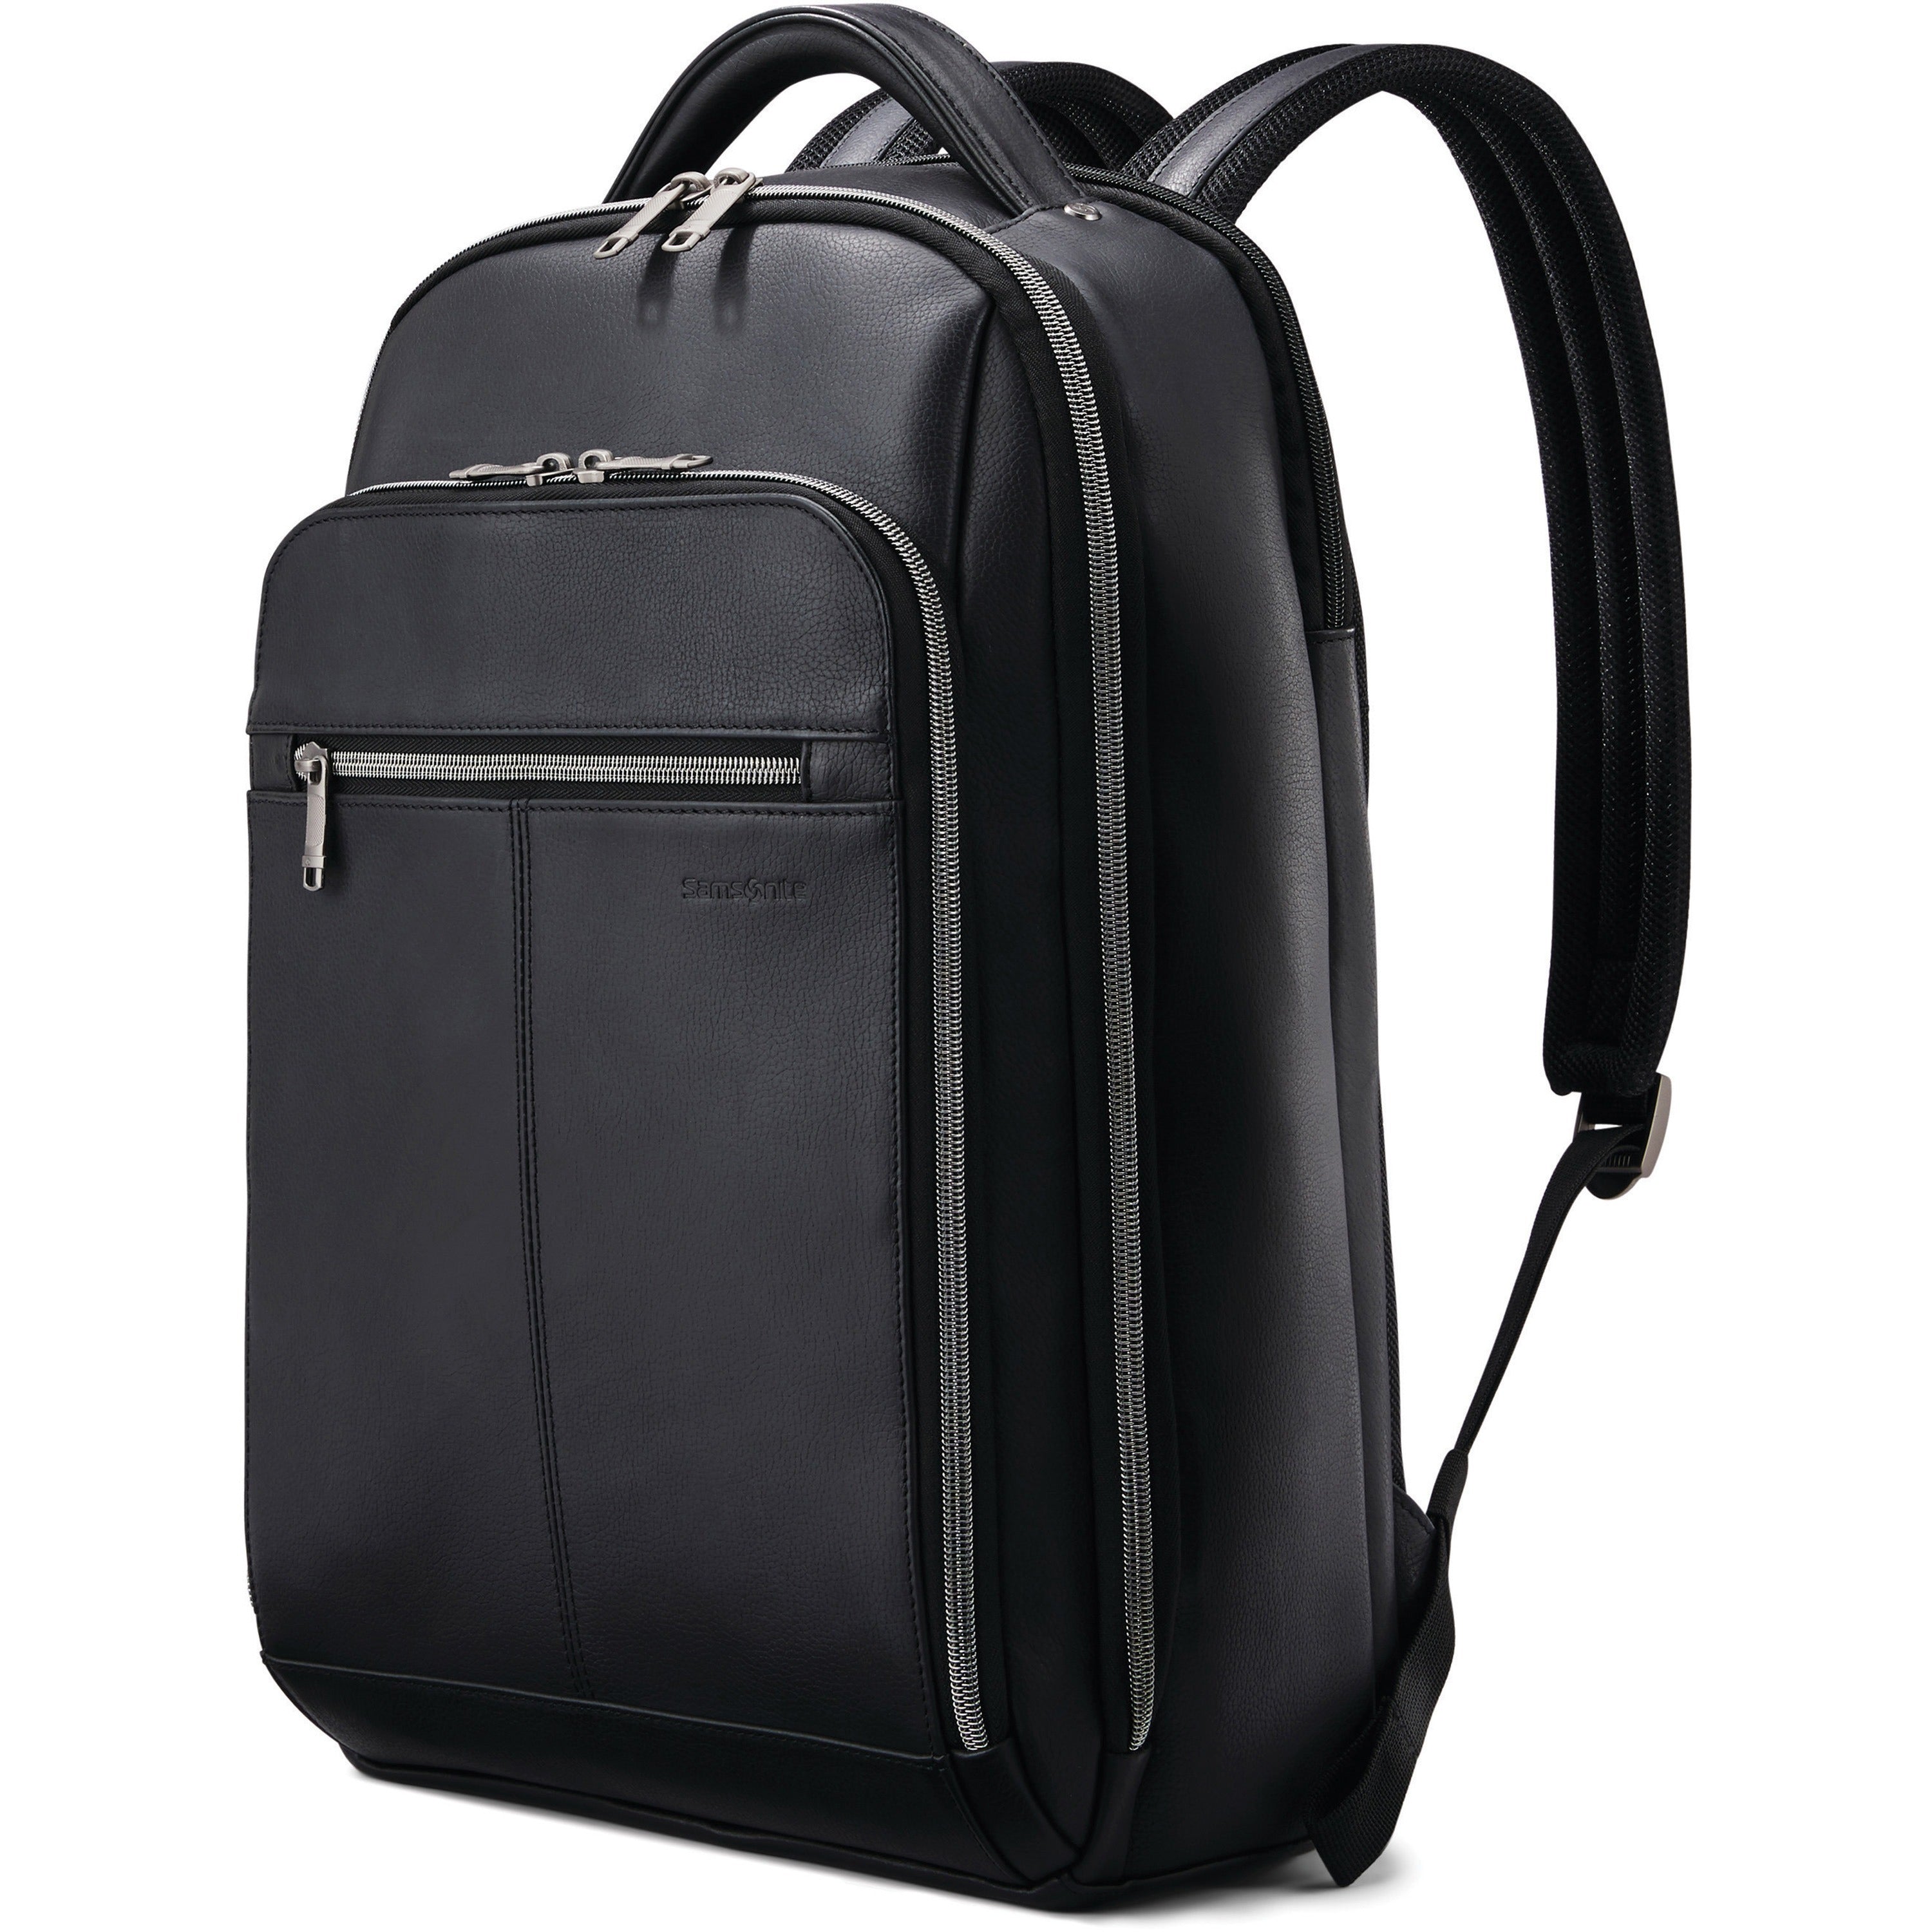 samsonite-carrying-case-backpack-for-156-notebook-black-damage-resistant-scuff-resistant-scratch-resistant-leather-body-shoulder-strap-18-height-x-55-width-1-each_sml1260371041 - 1